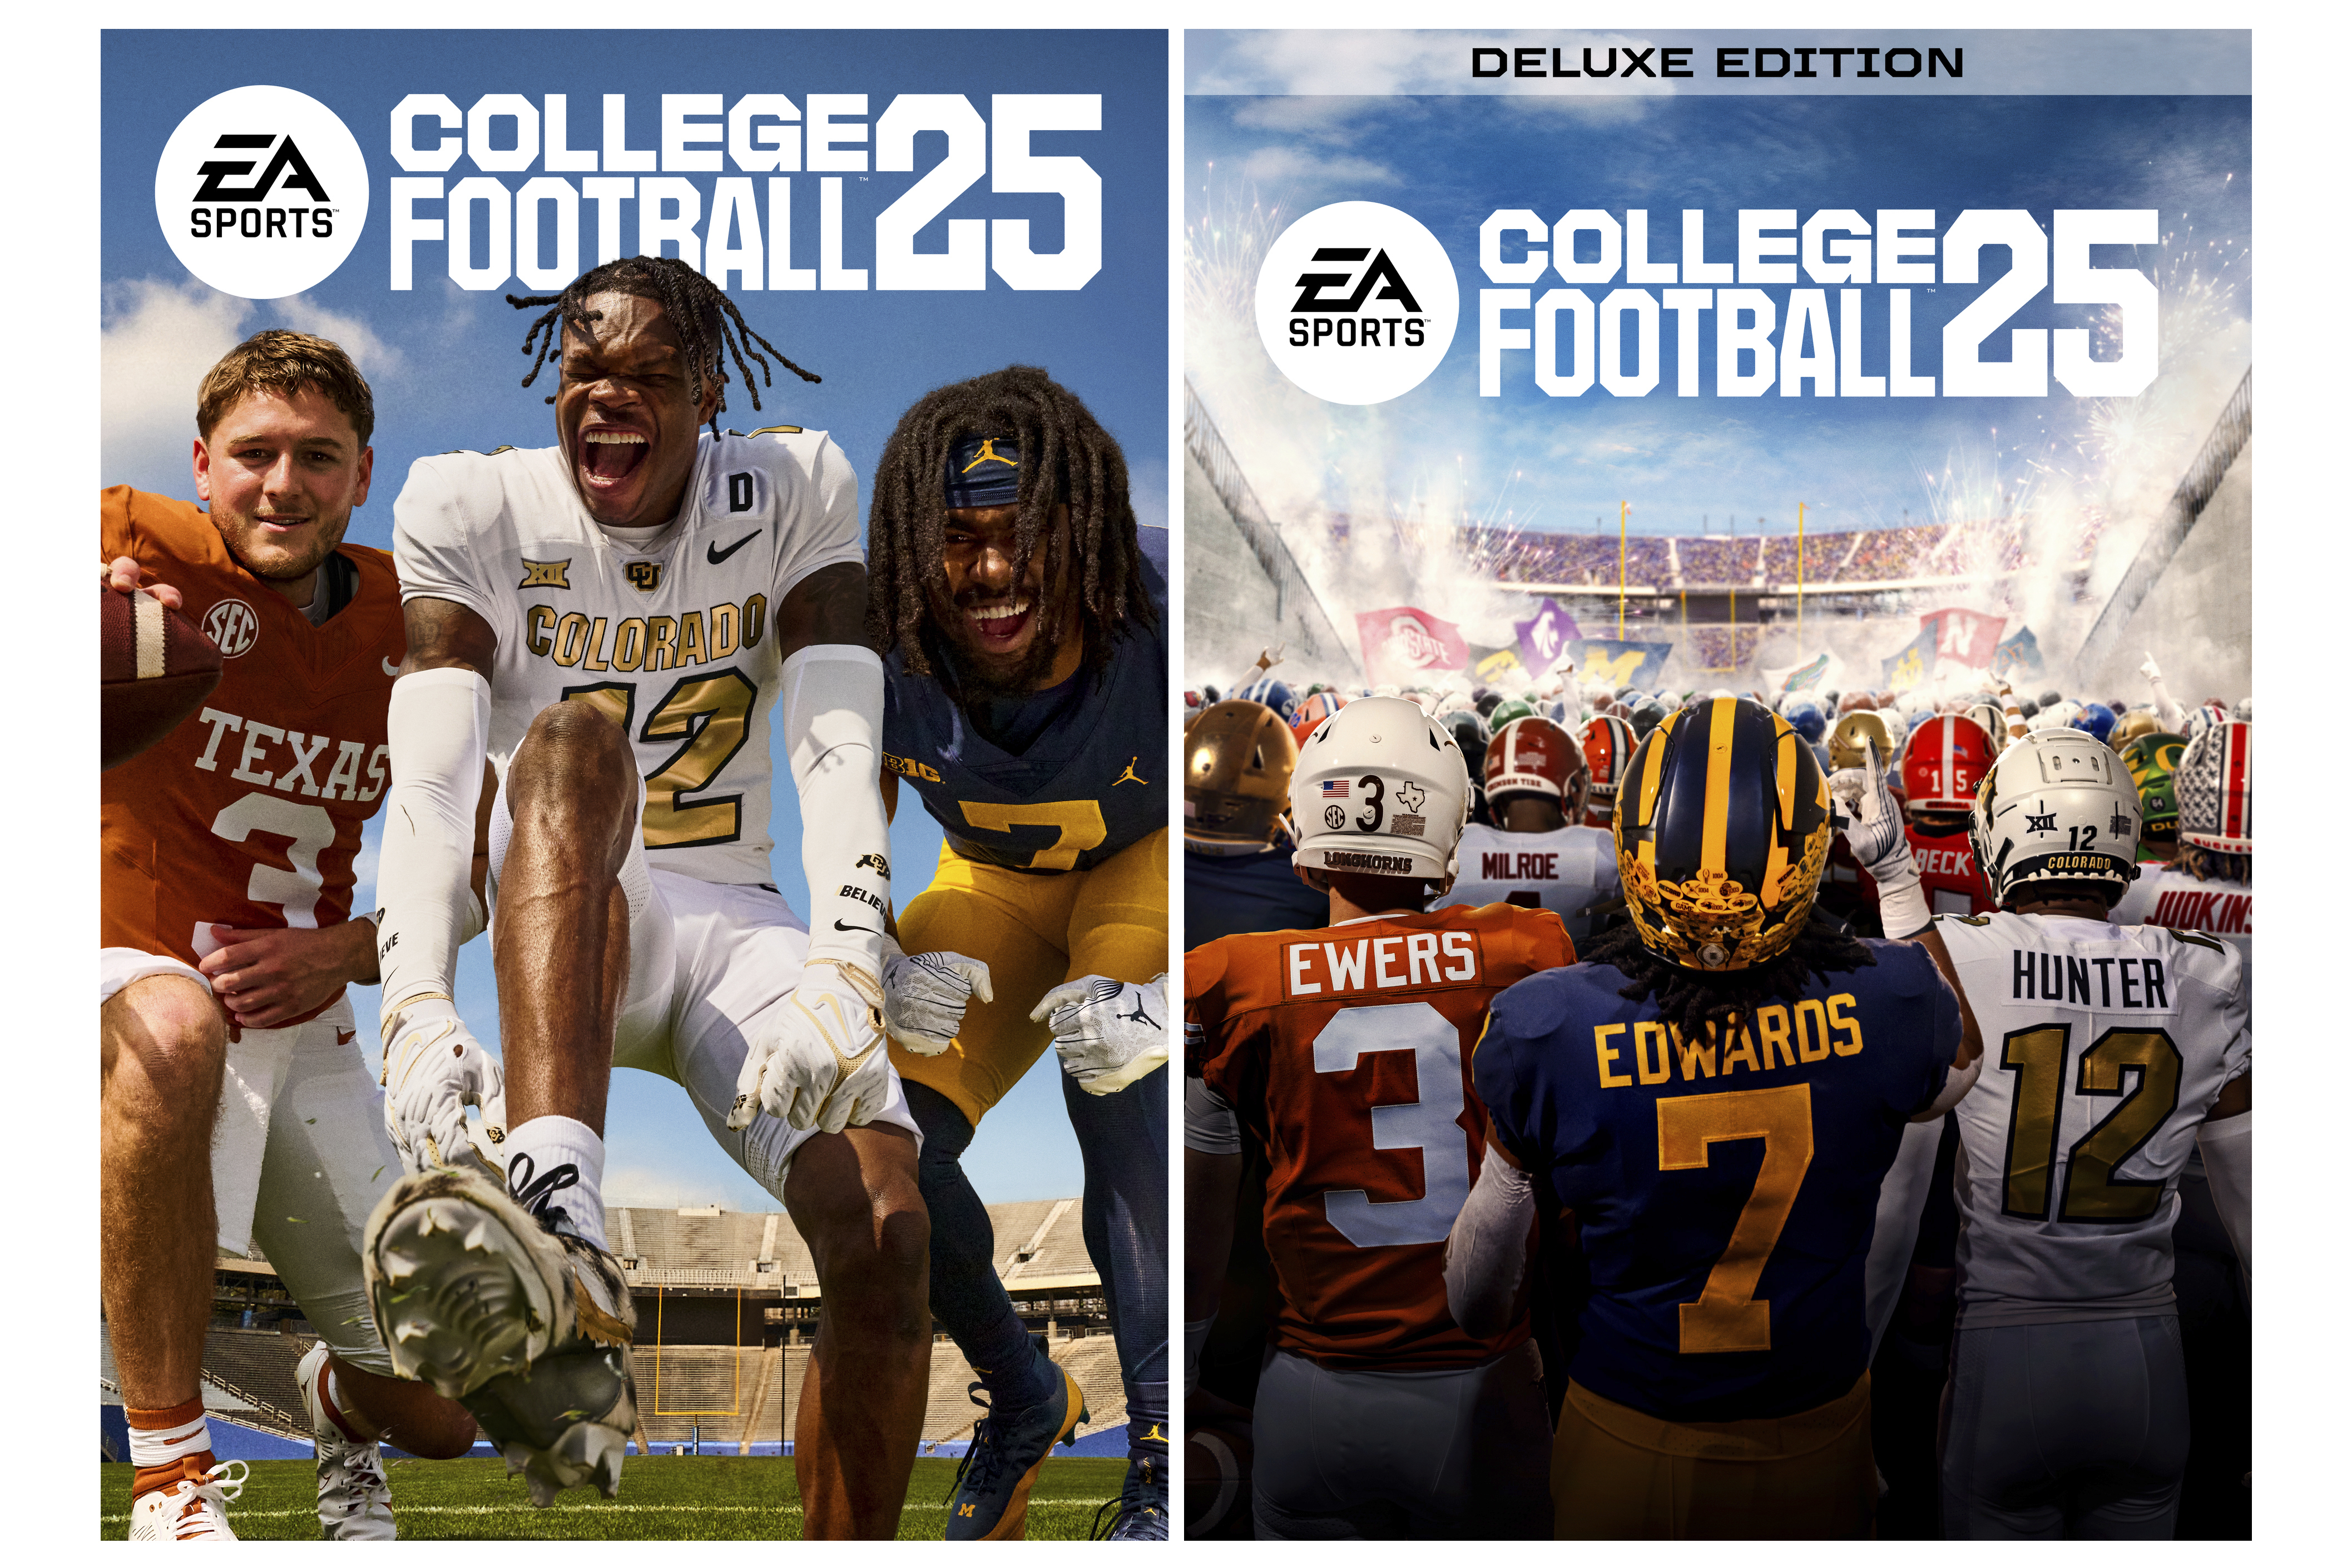 This combo of images provided by EA Sports, shows the video game covers for the new standard edition College Football 25, left, and Deluxe Edition College Football 25, featuring Texas' Quinn Ewers, Colorado's Travis Hunter, and Michigan's Donovan Edwards.